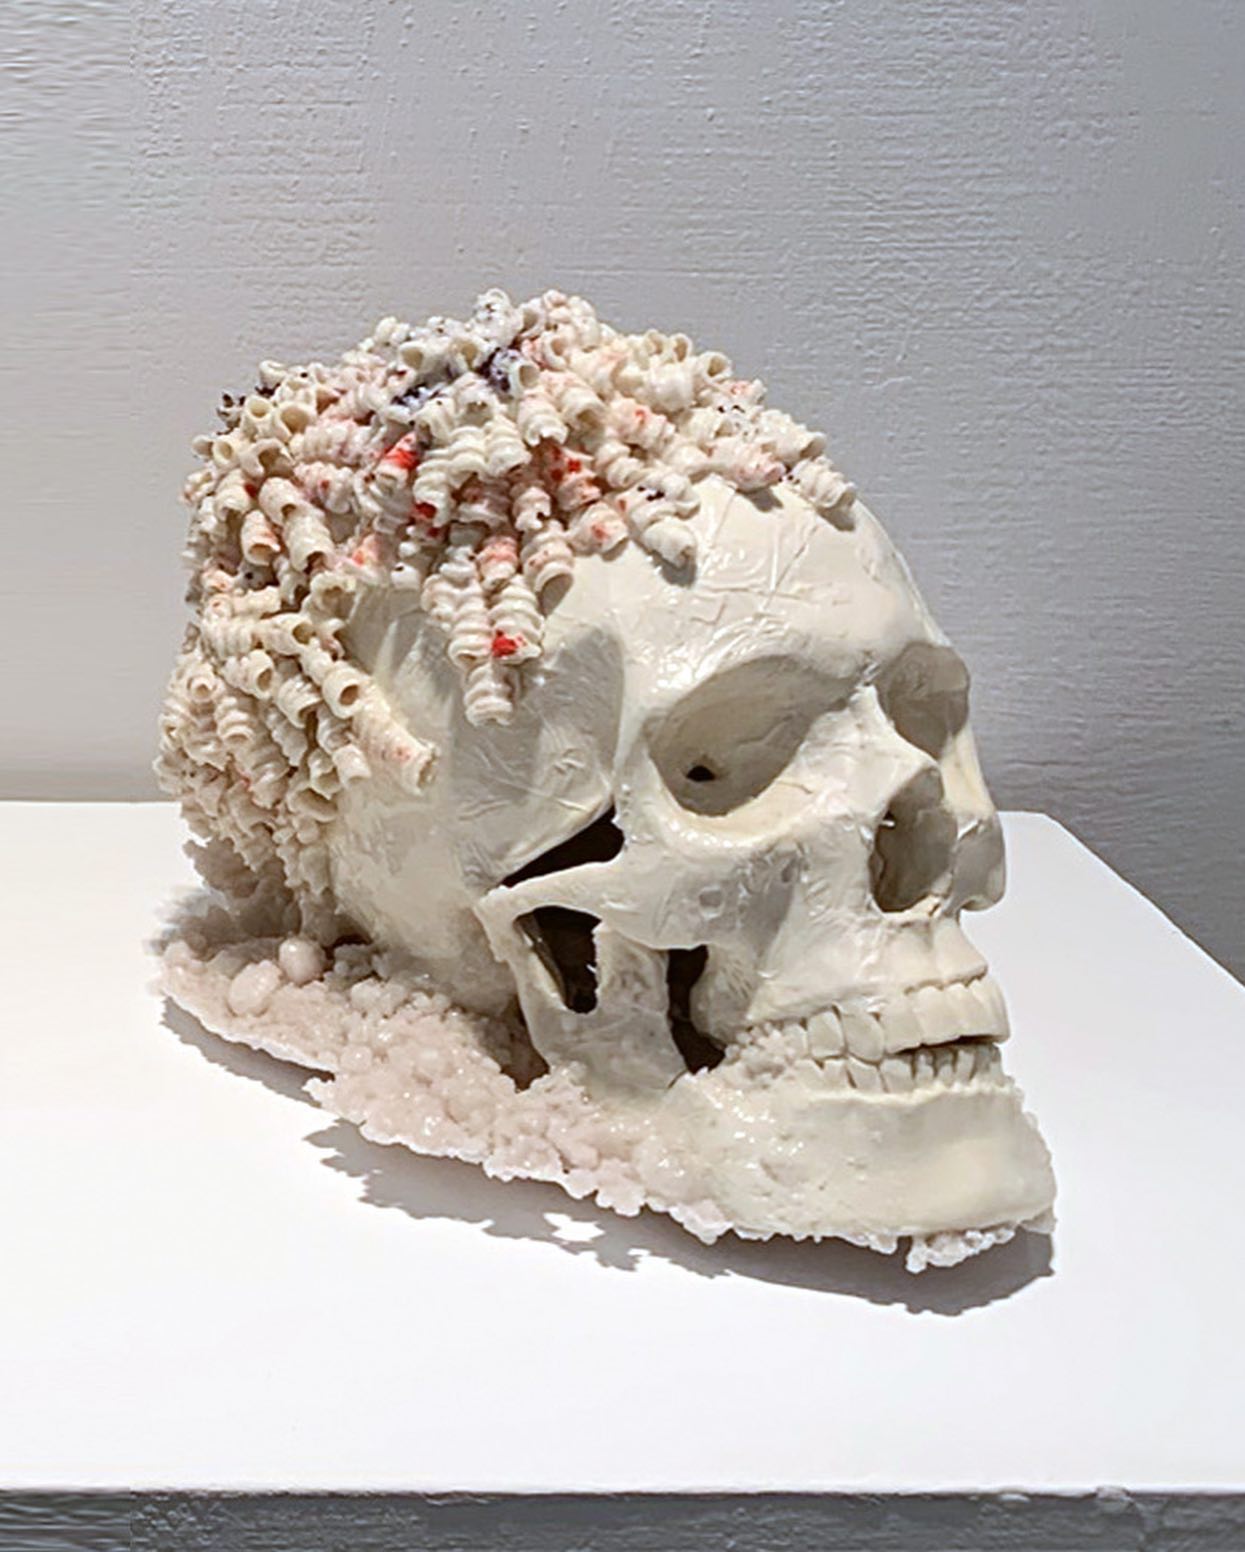 Surreal Ceramic Sculptures By Christine Yiting Wang (5)